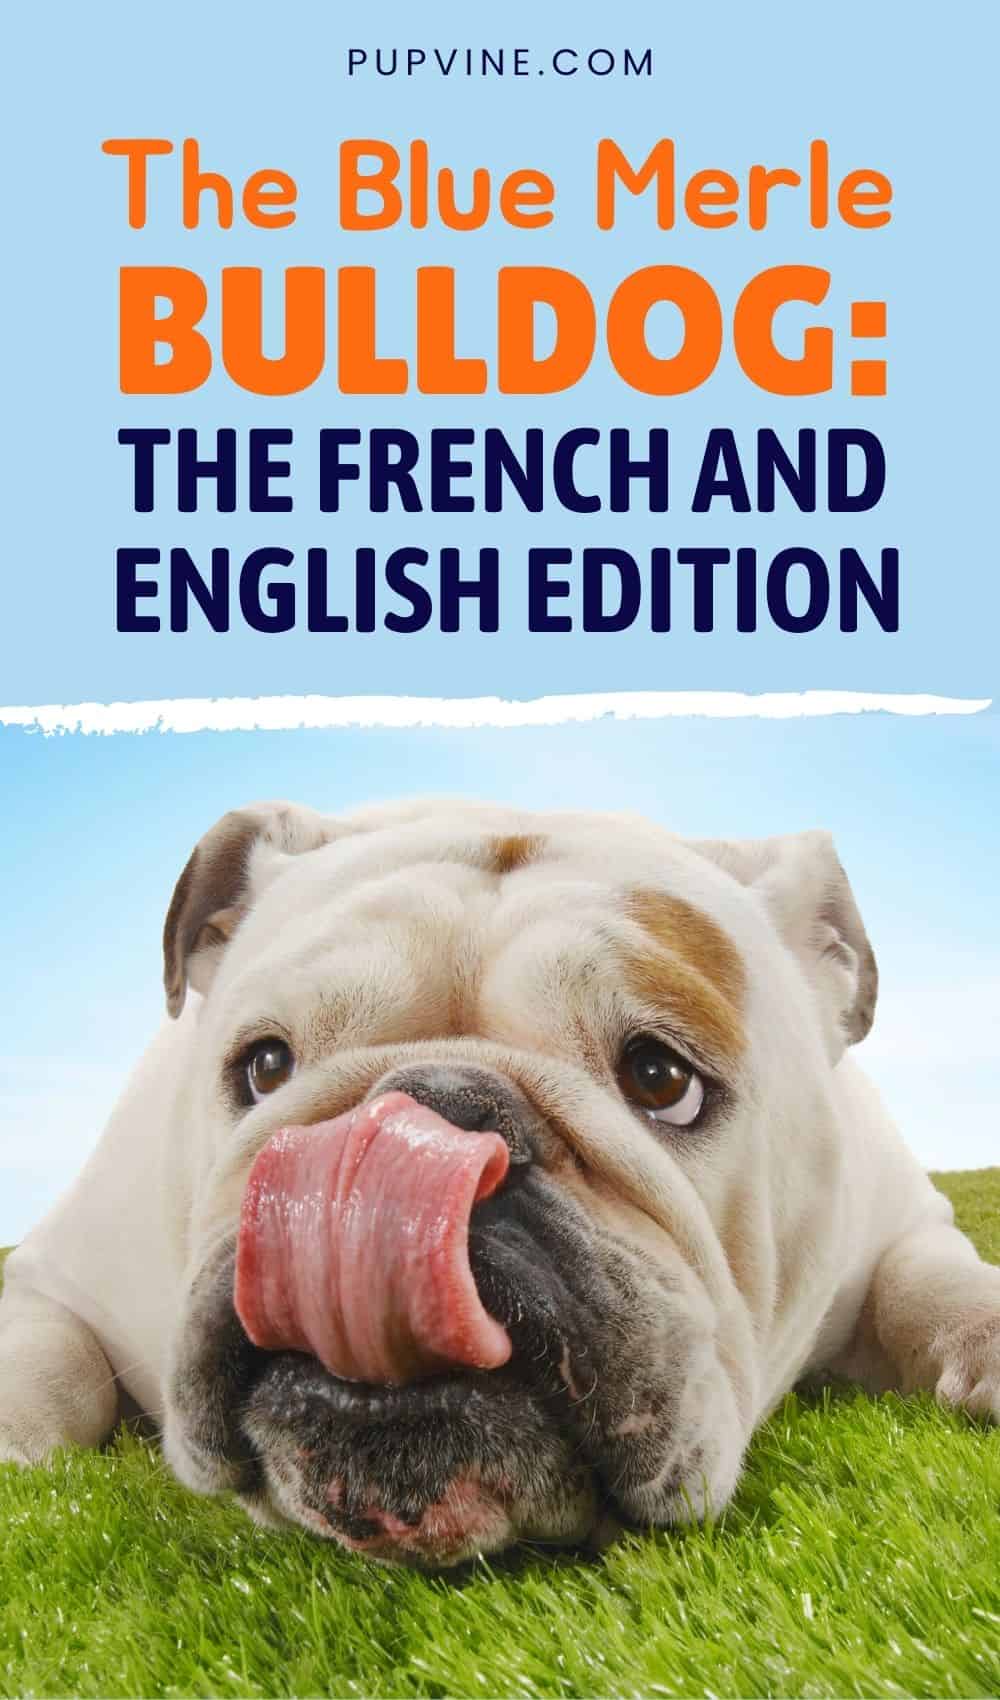 The Blue Merle Bulldog The French And English Edition